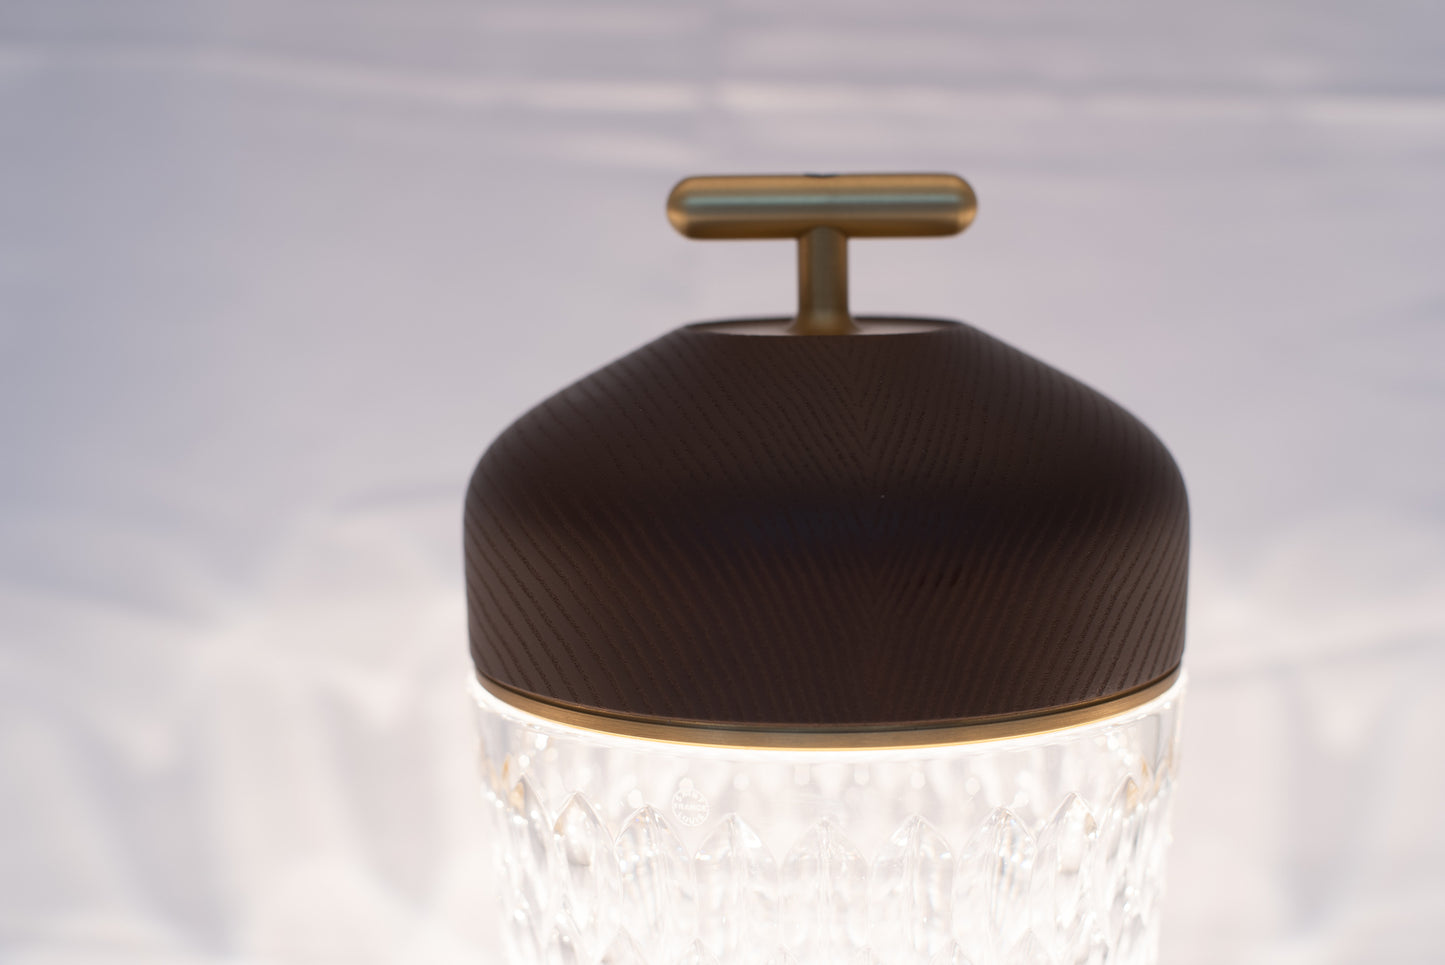 Bevel Cut St. Louis  Crystal indoor/Outdoor Re-chargeable LED Table Lamp lasts up to 25 hours on a single charge.